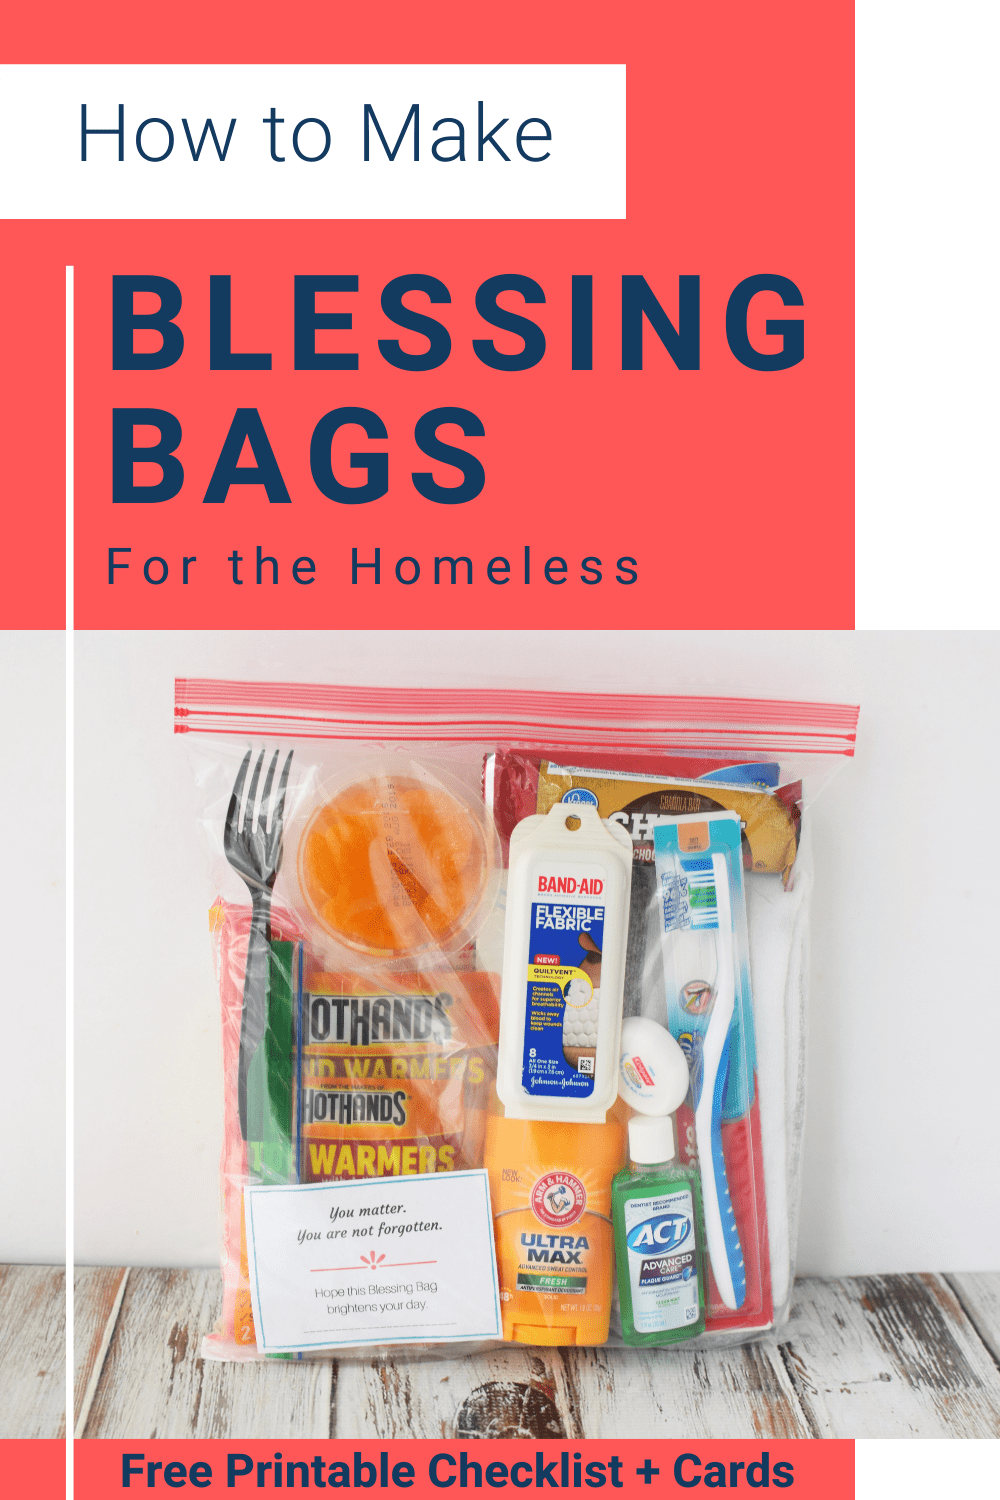 Blessing Bags for Homeless - Comprehensive Guide - Organized 31